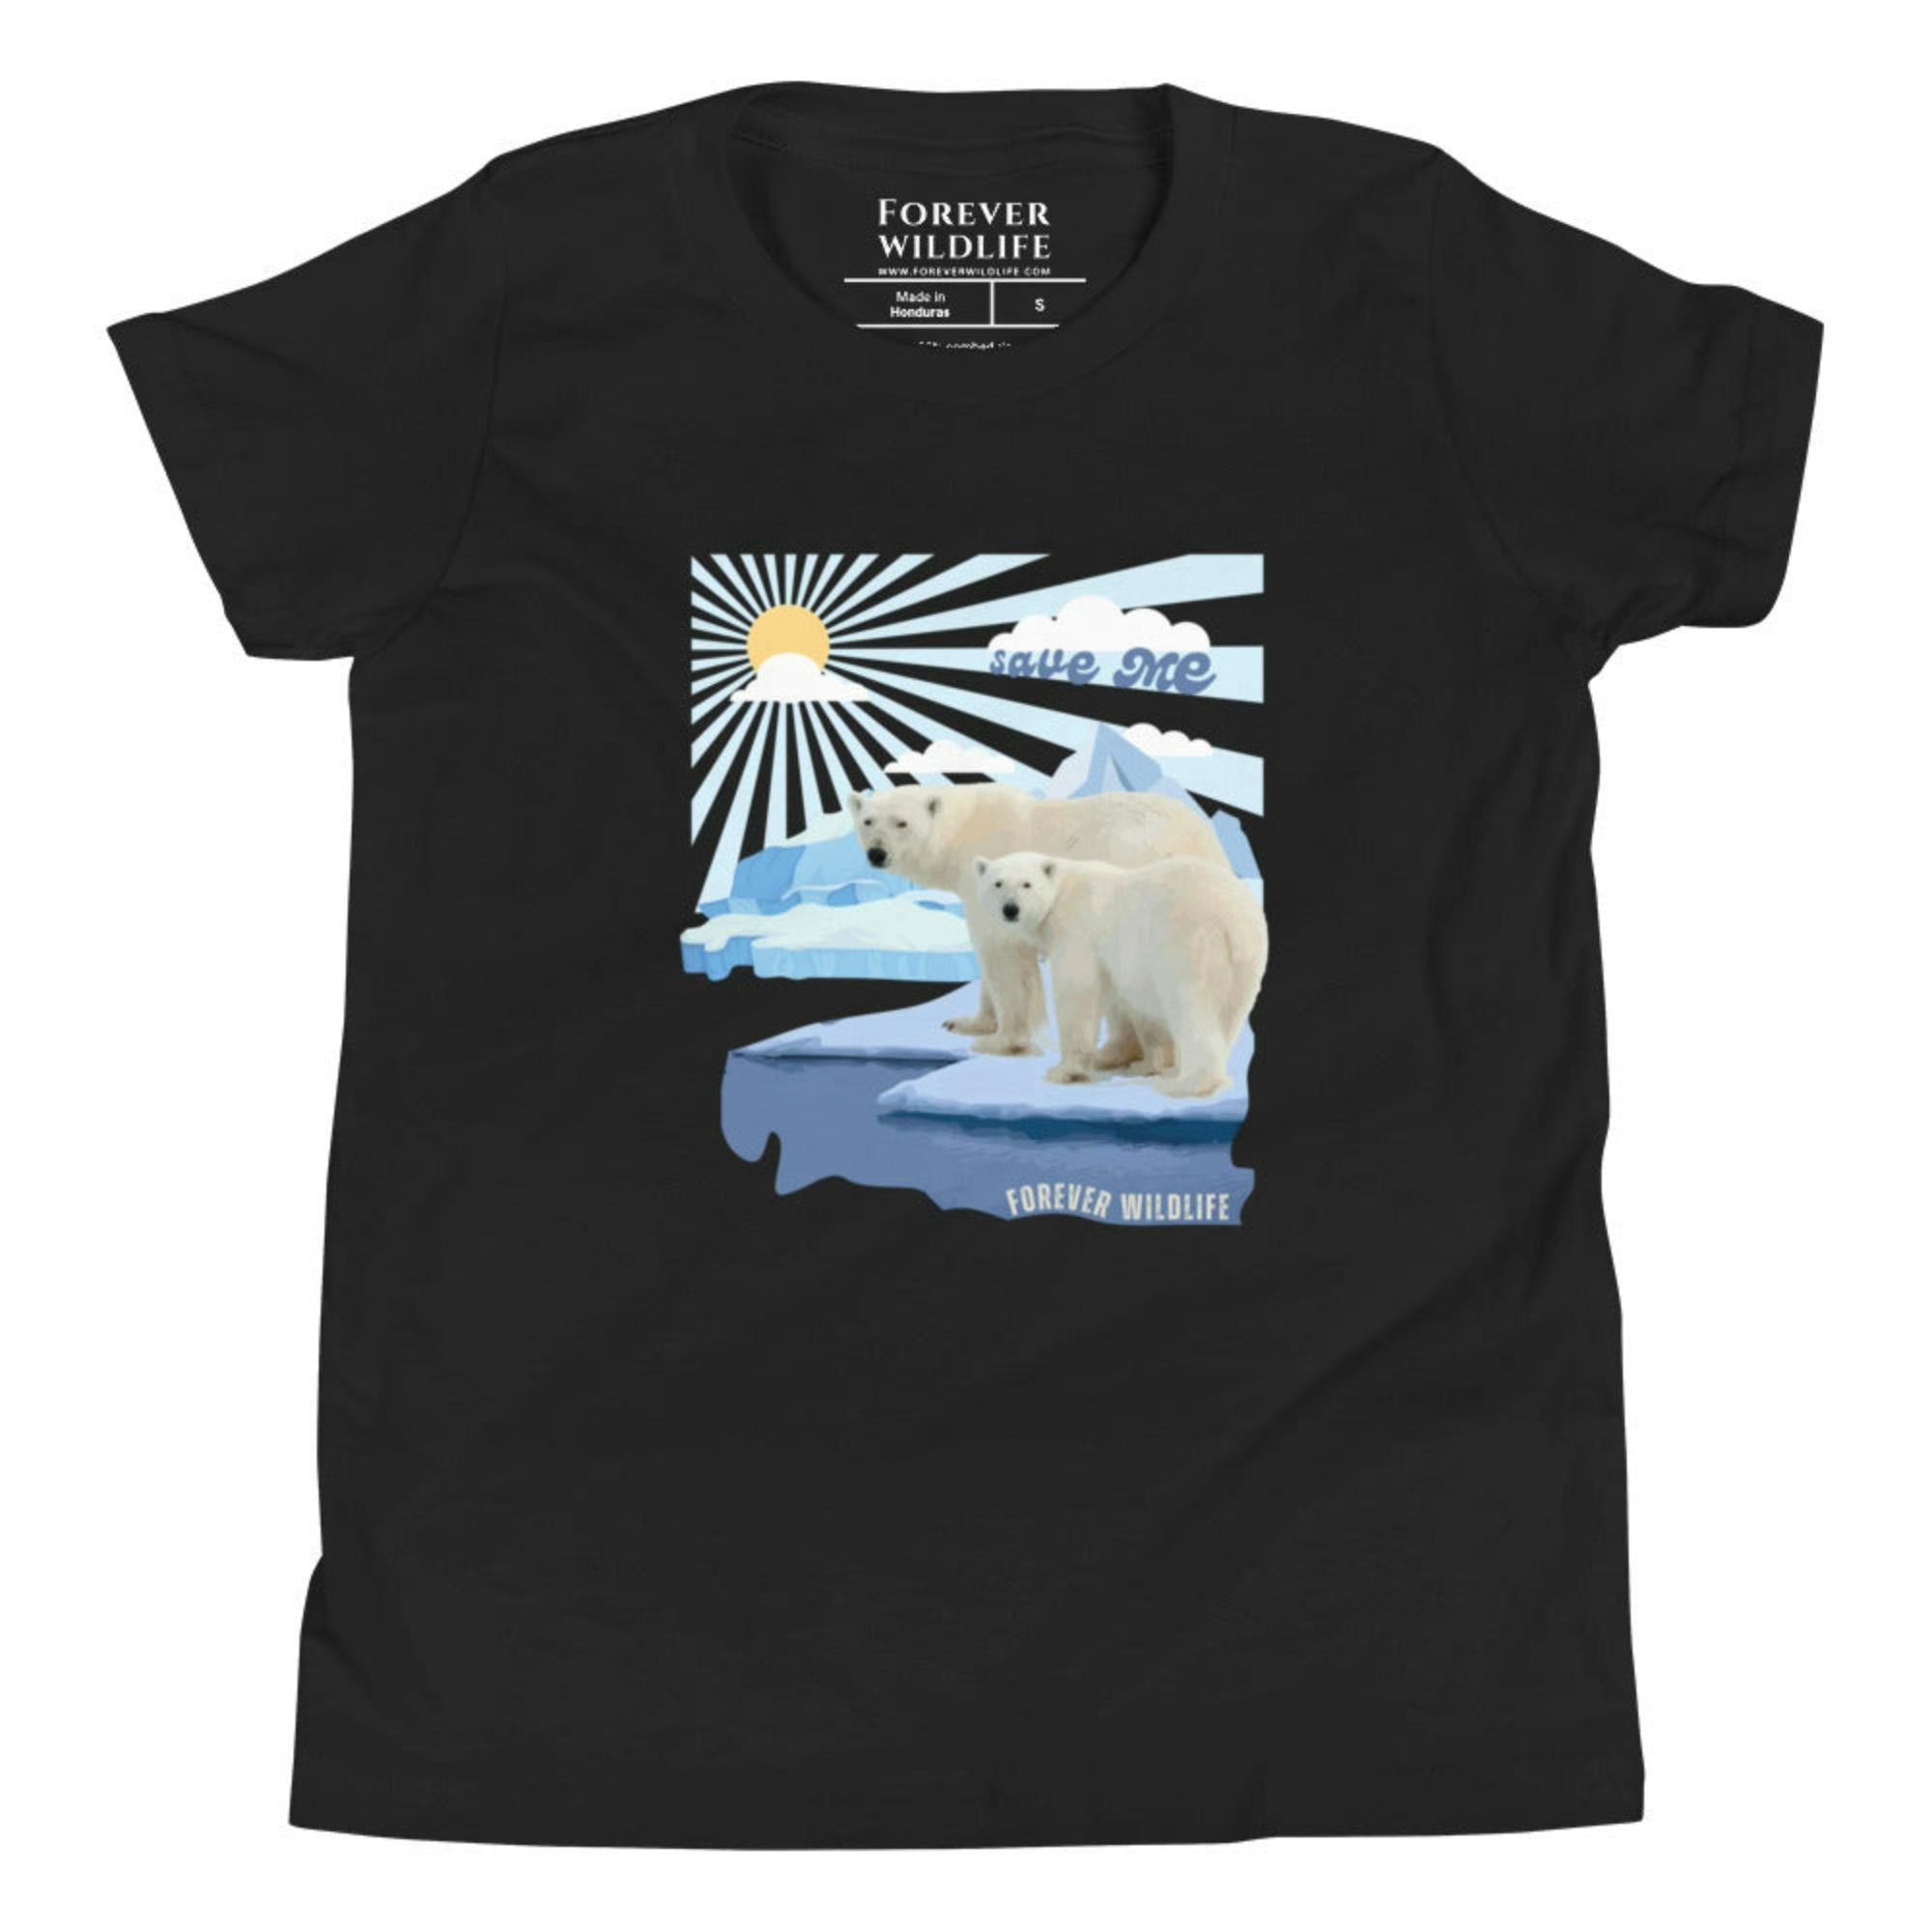 Black Save The Polar Bears Youth T-Shirt with Polar Bear graphic as part of Wildlife T Shirts, Wildlife Clothing & Apparel by Forever Wildlife